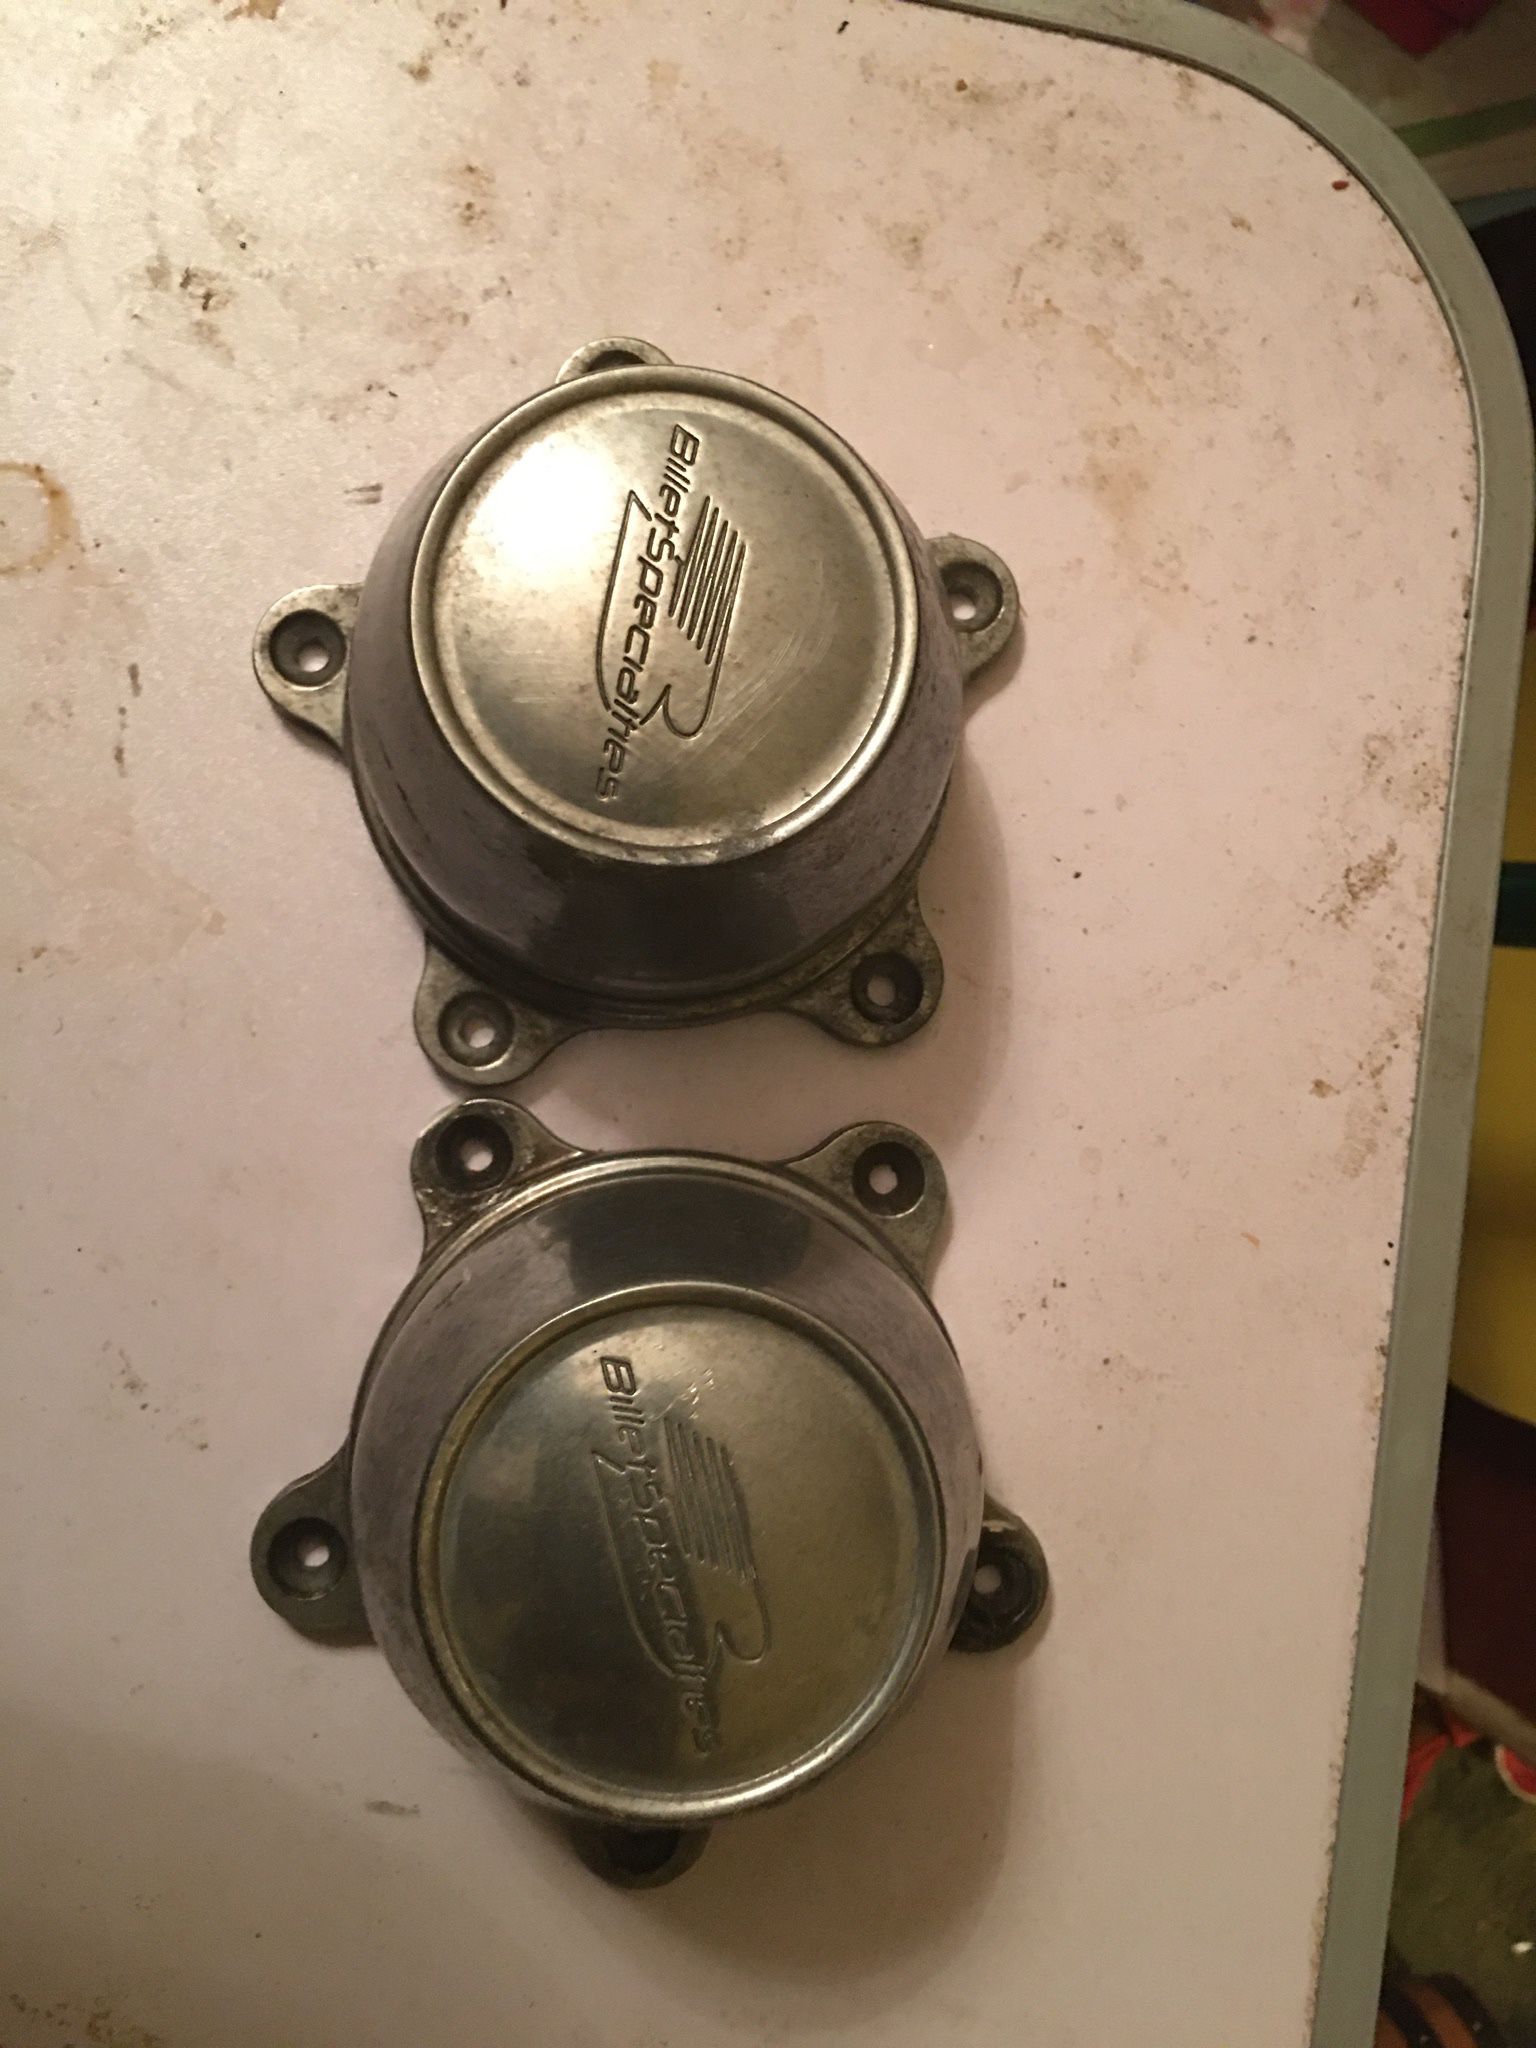 2-BILLET SPECIALTIES CENTER CAPS FOR STREET LITES RIMS USED IN GOOD CONDITION $20.00